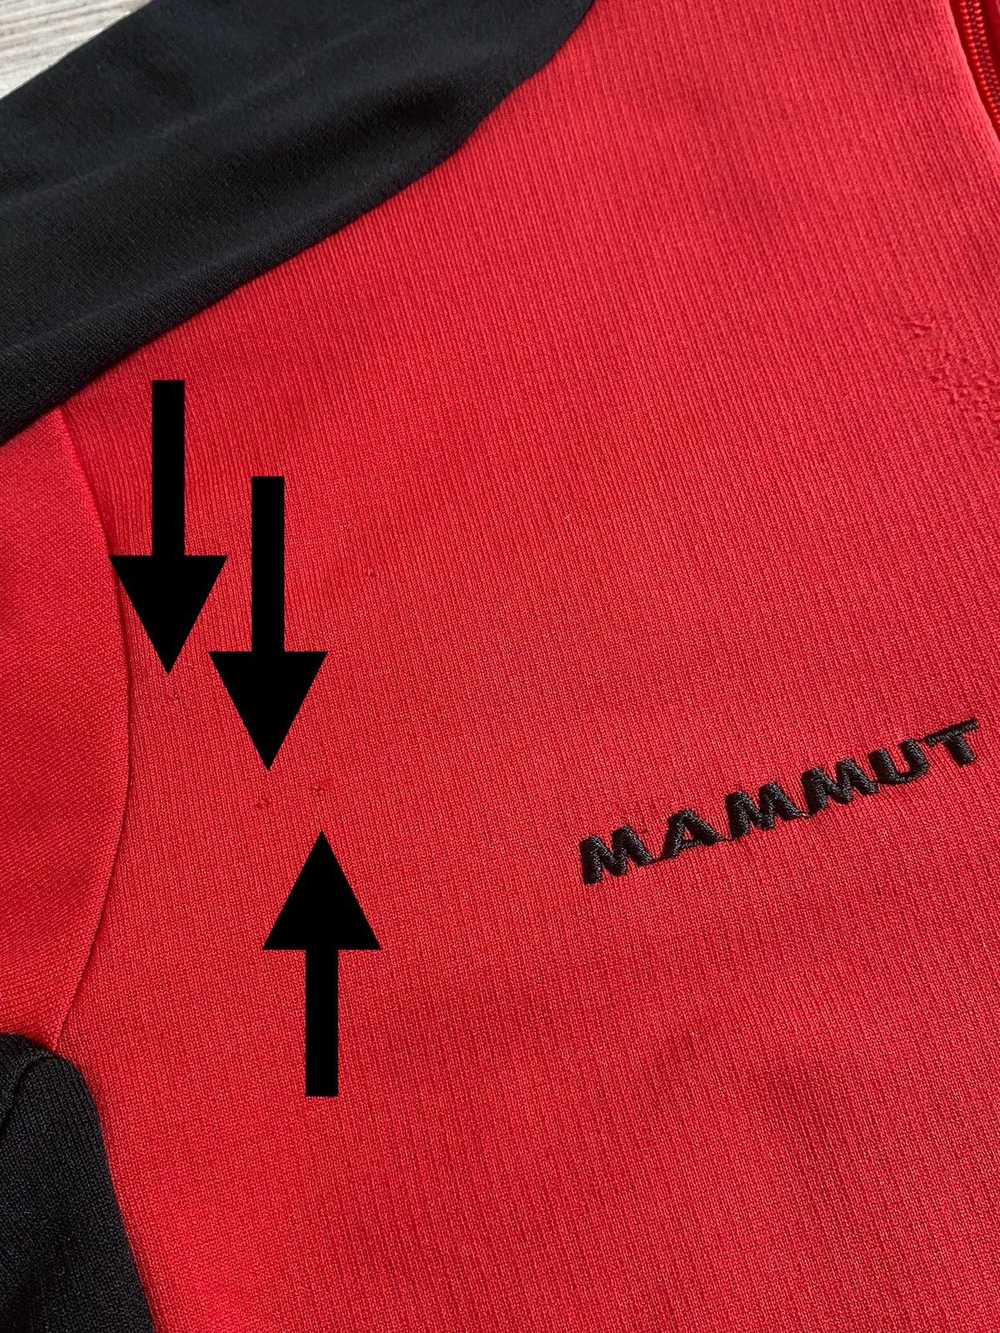 Mammut × Outdoor Life Mammut Red Thermoactive Tsh… - image 6